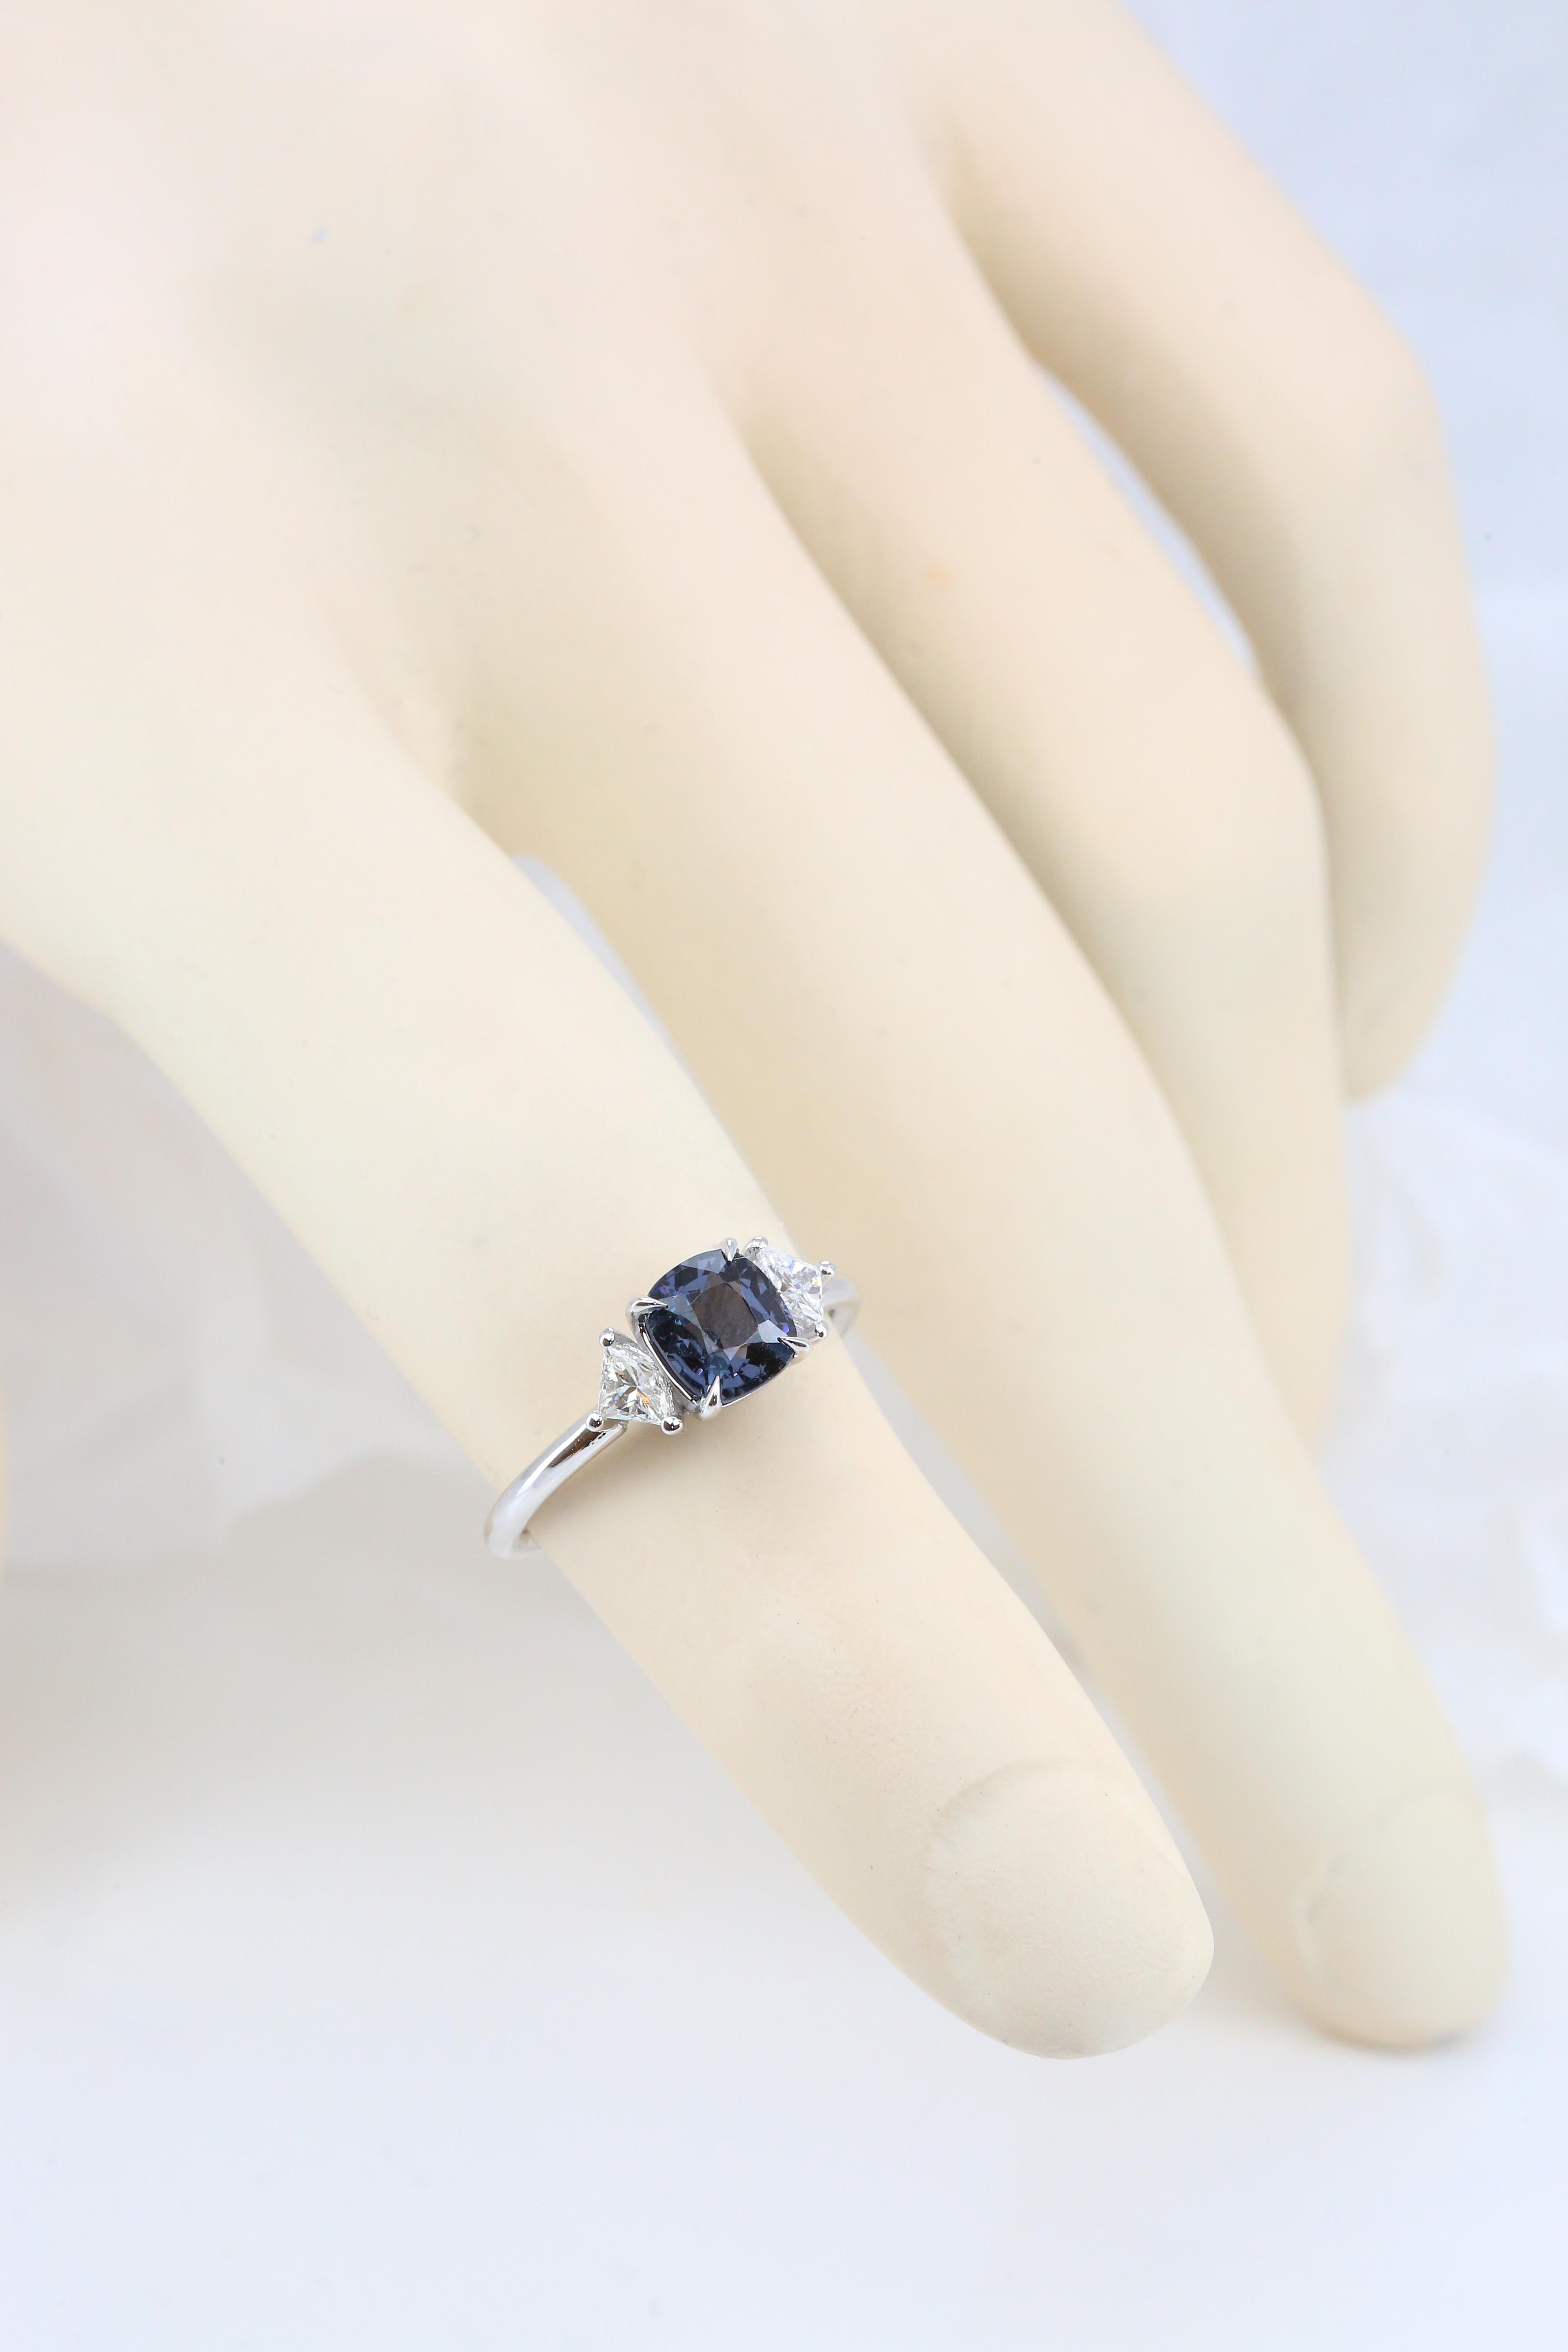 For Sale:  14k Gold 1.28 Ct Spinel and Diamond Engagement Solitaire Ring 7